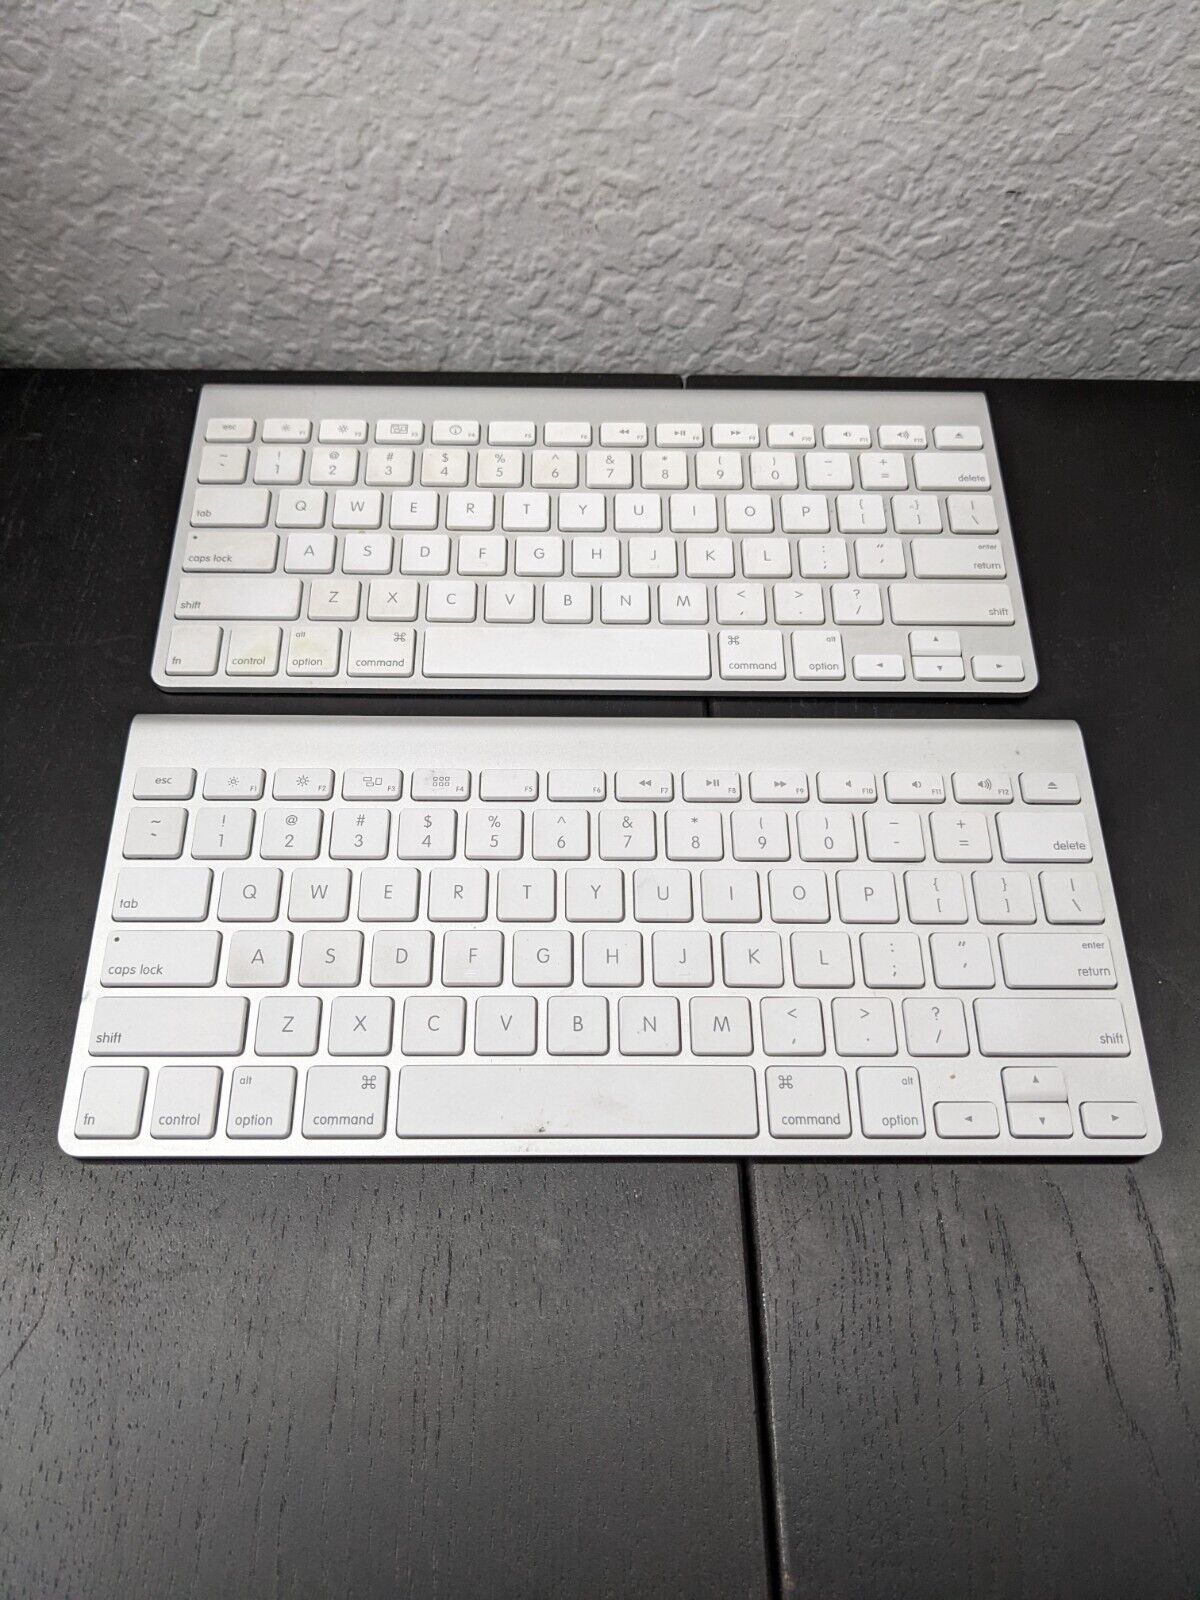 2x OEM APPLE A1314 Wireless Keyboards - BOTH FOR PARTS/REPAIR, AS IS